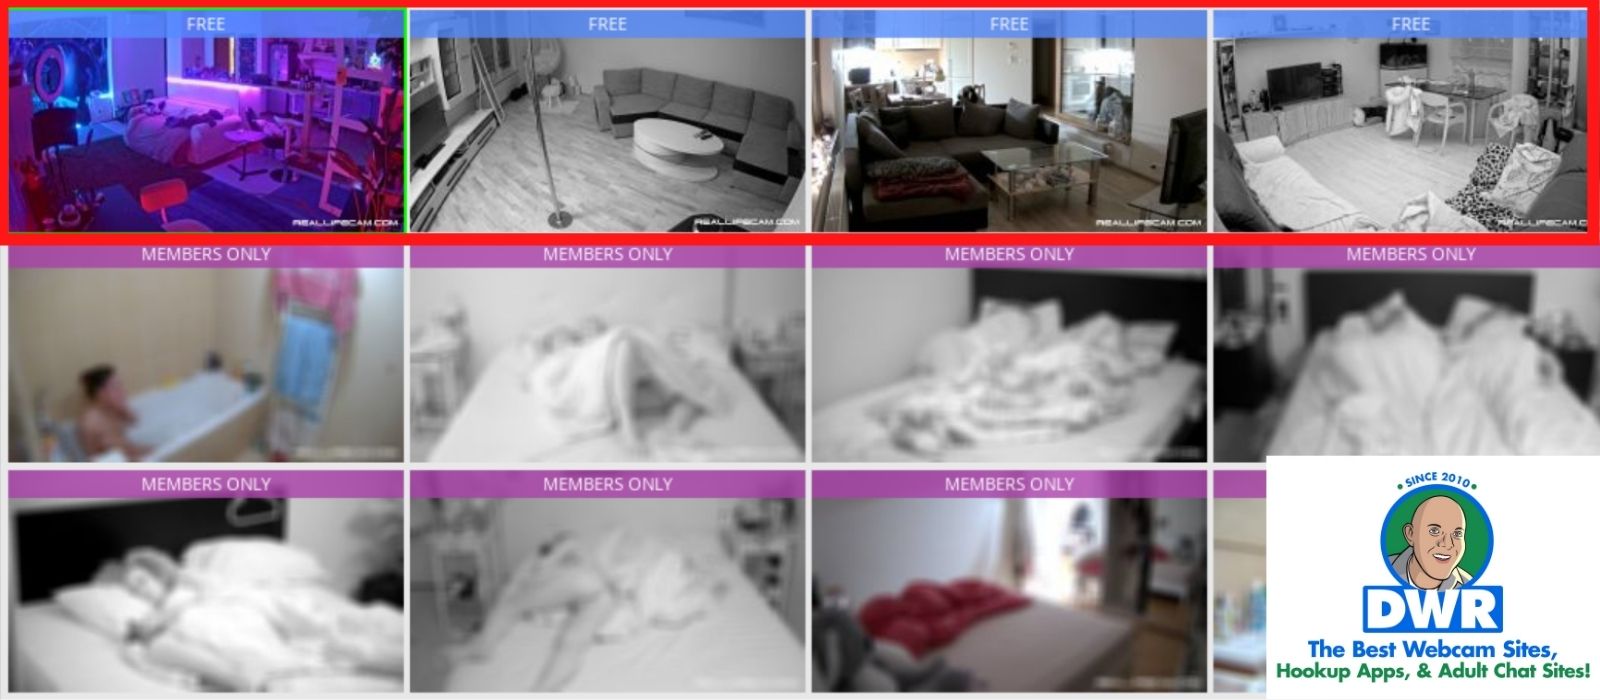 Is RealLifeCam Free To Watch or Not?